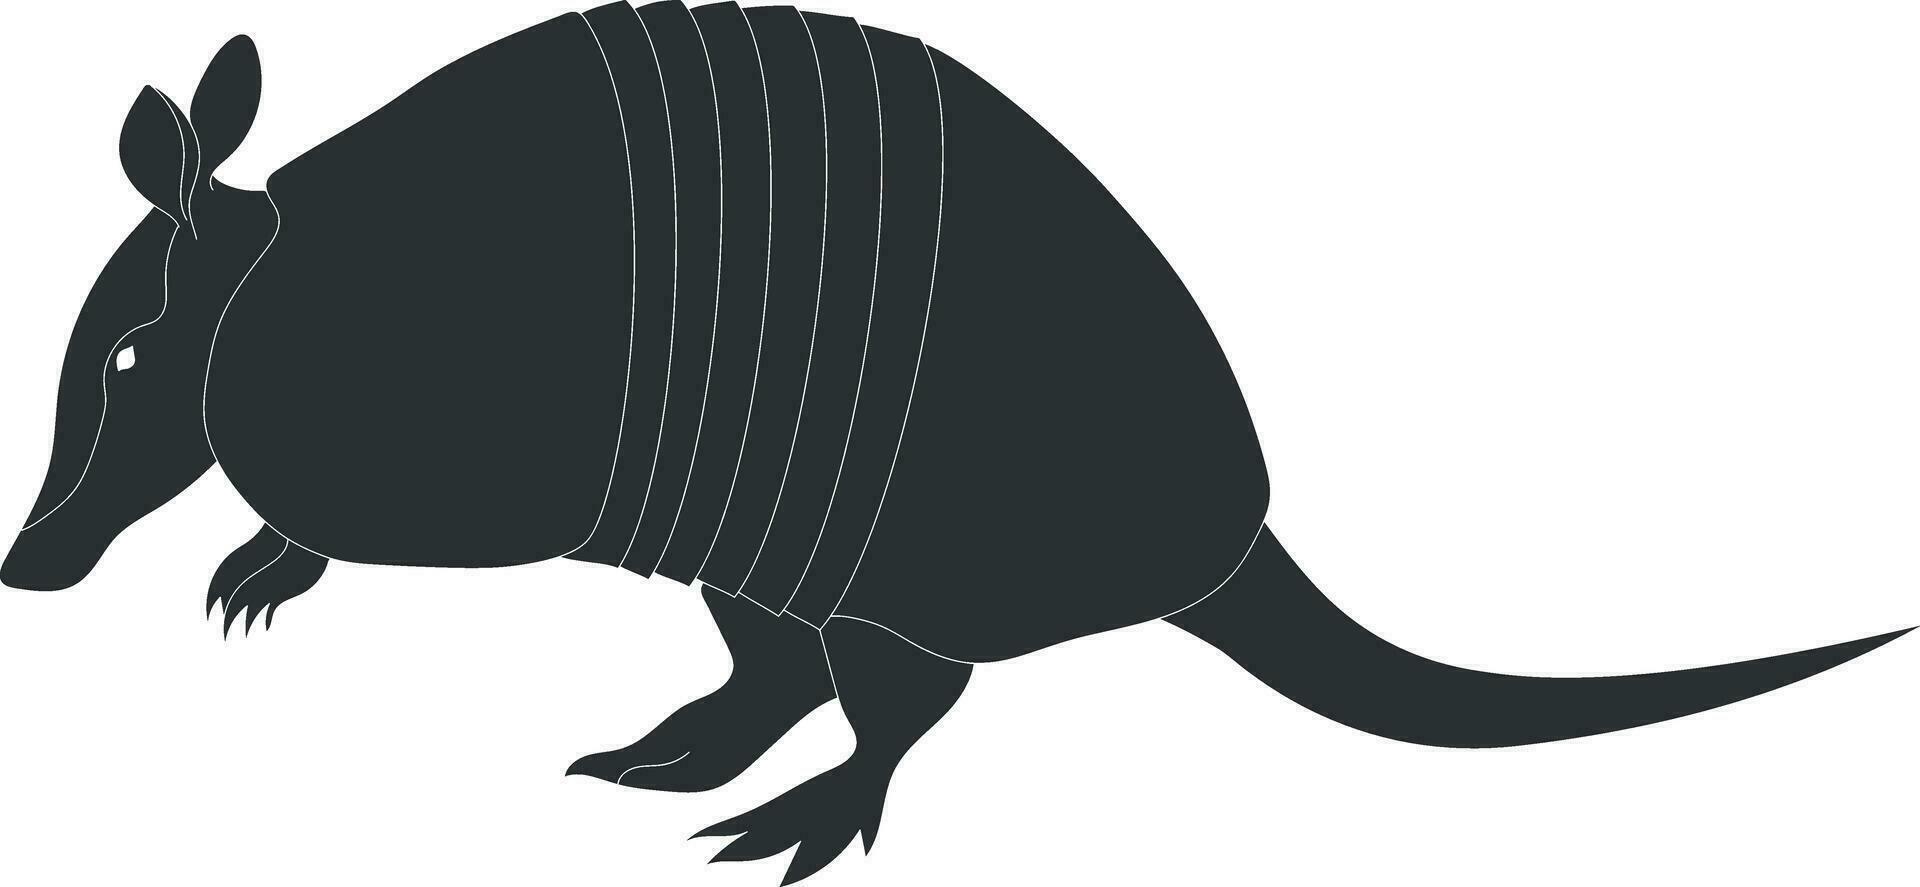 Armadillo silhouette isolated on white background. Vector illustration